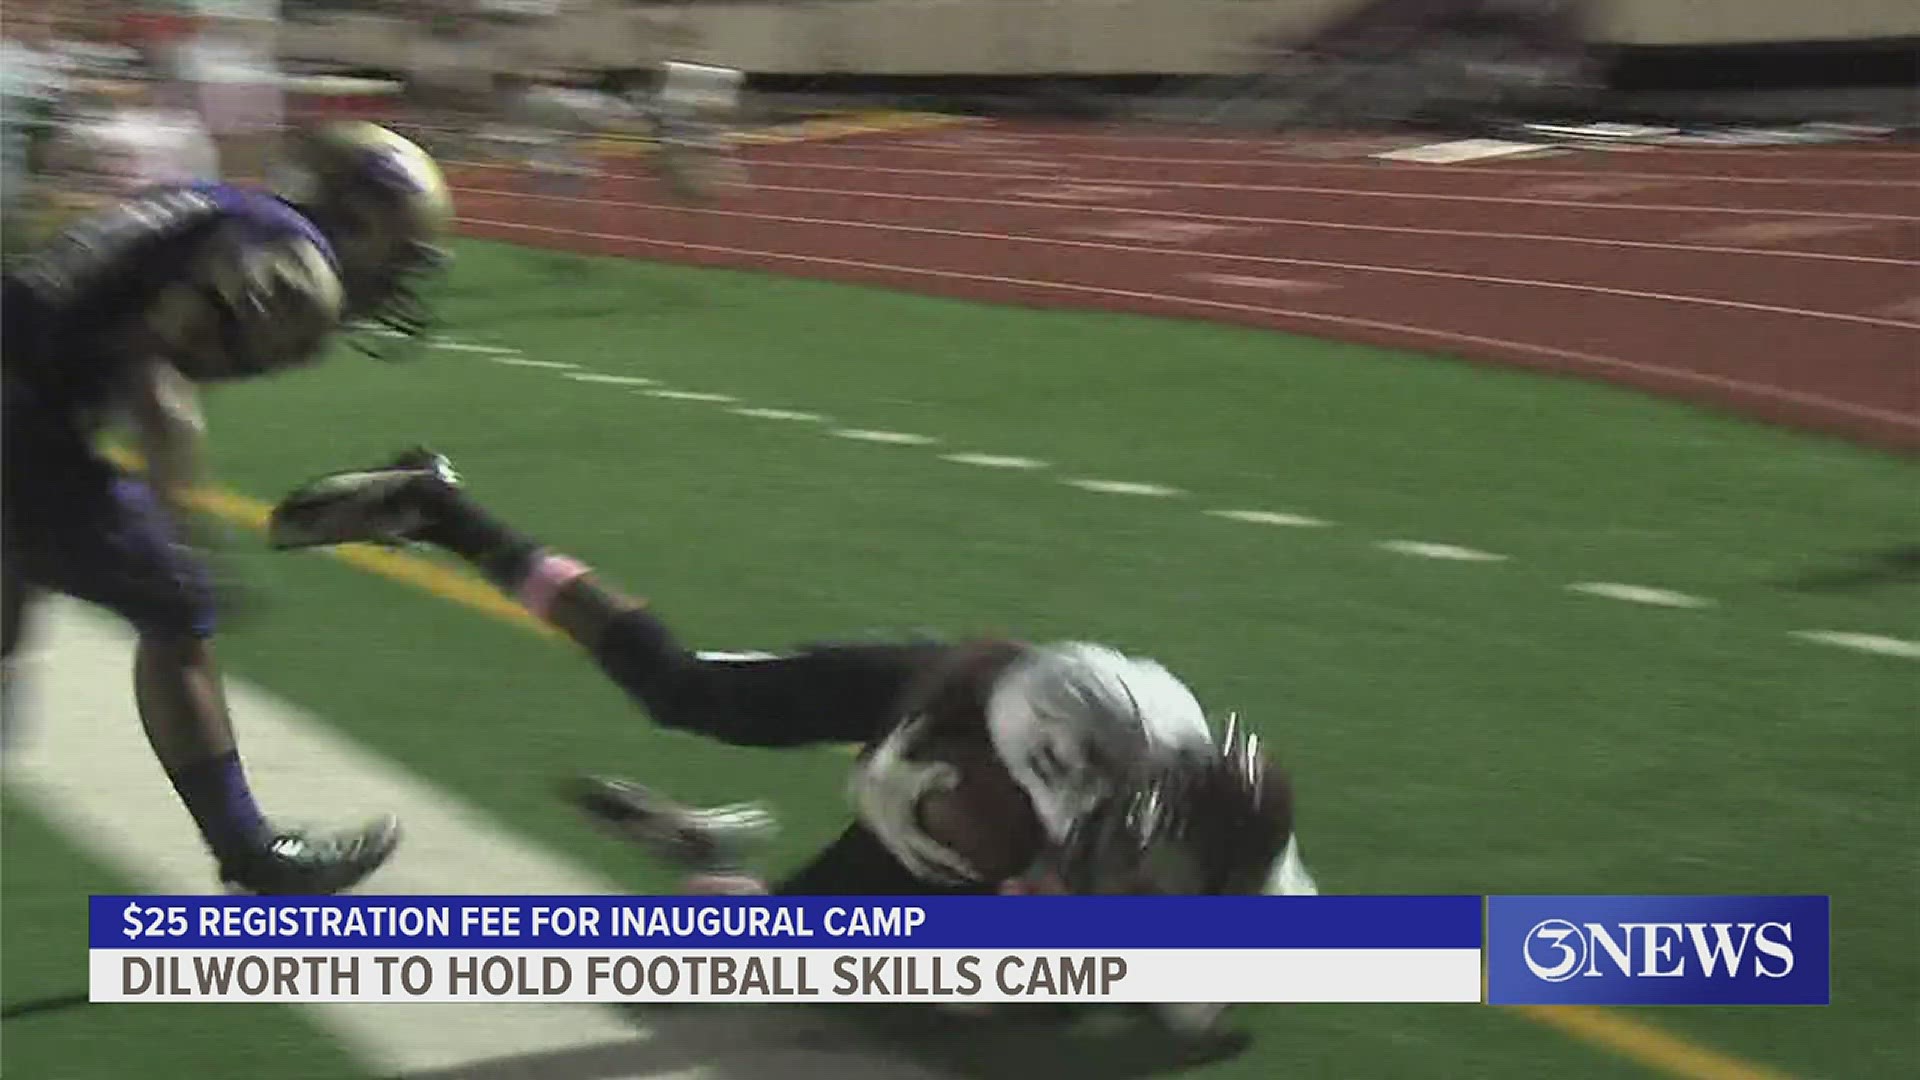 The former Javelina and Flour Bluff Hornet will be hosting a two-day camp this week for only $25.